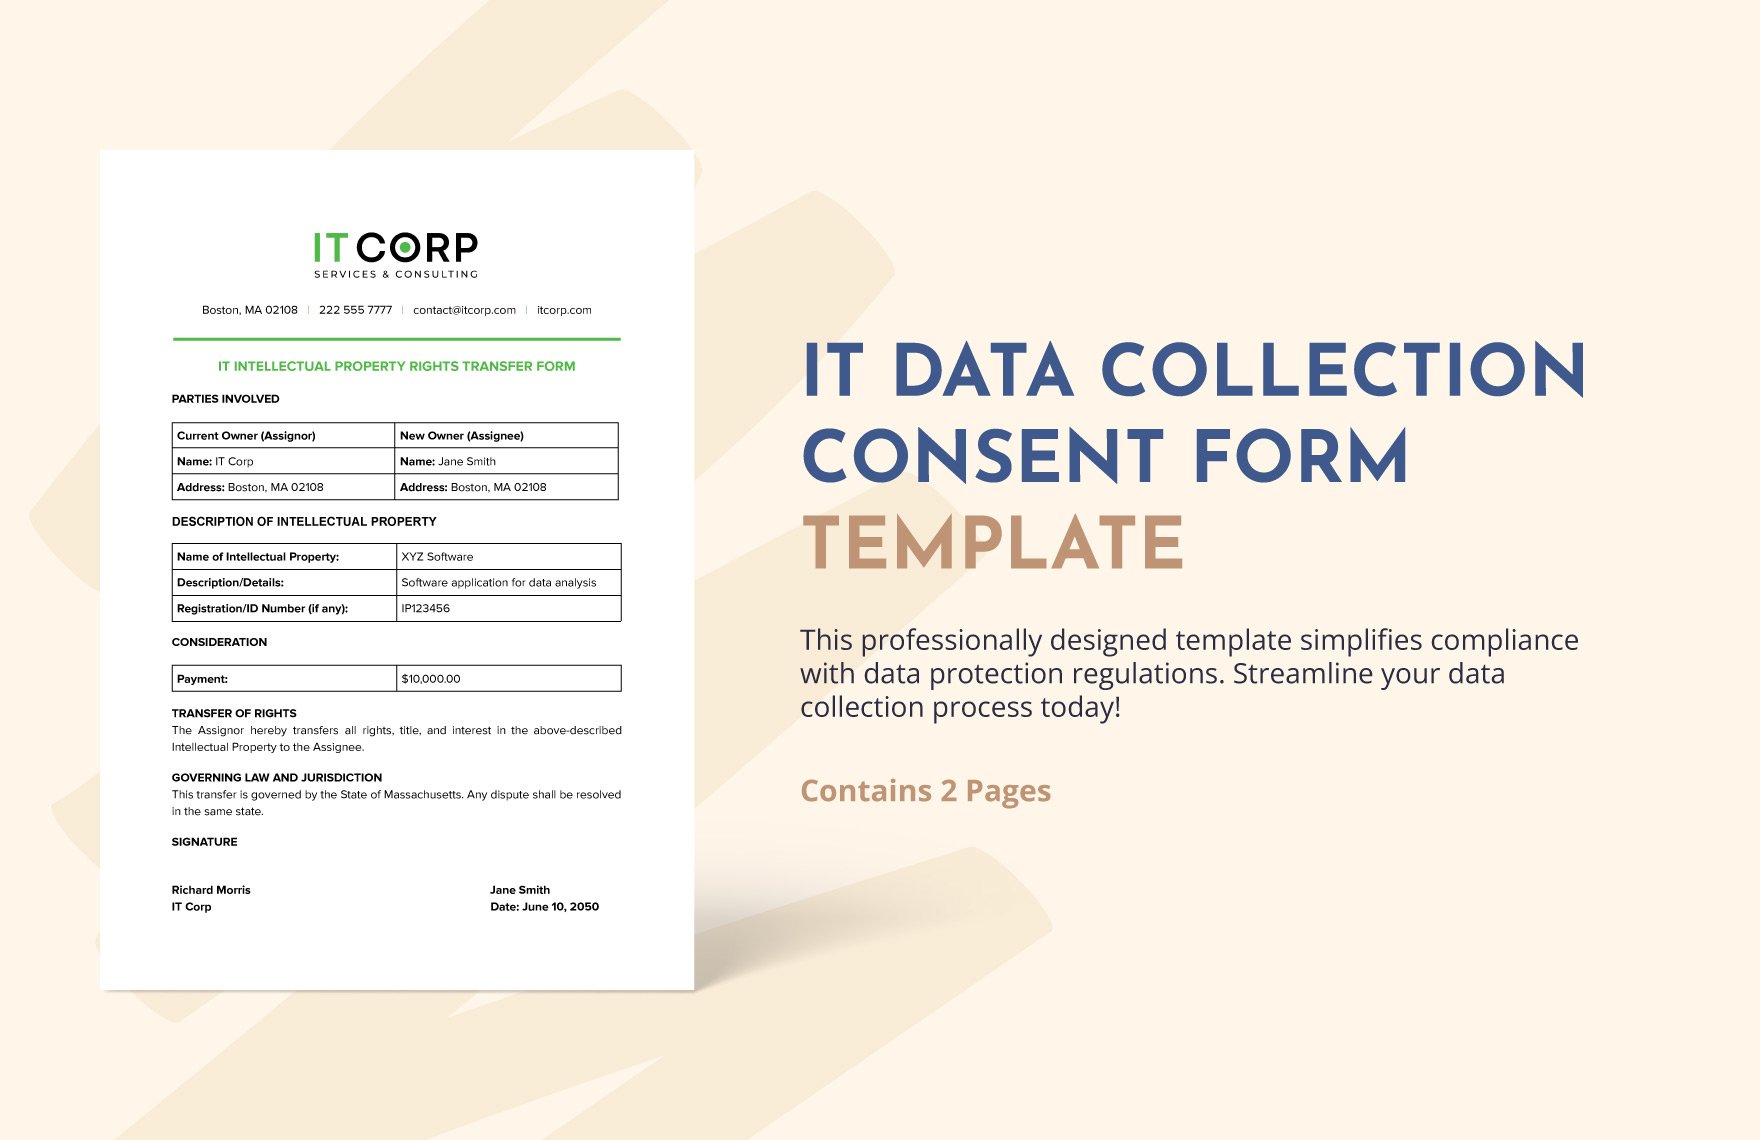 IT Data Collection Consent Form Template